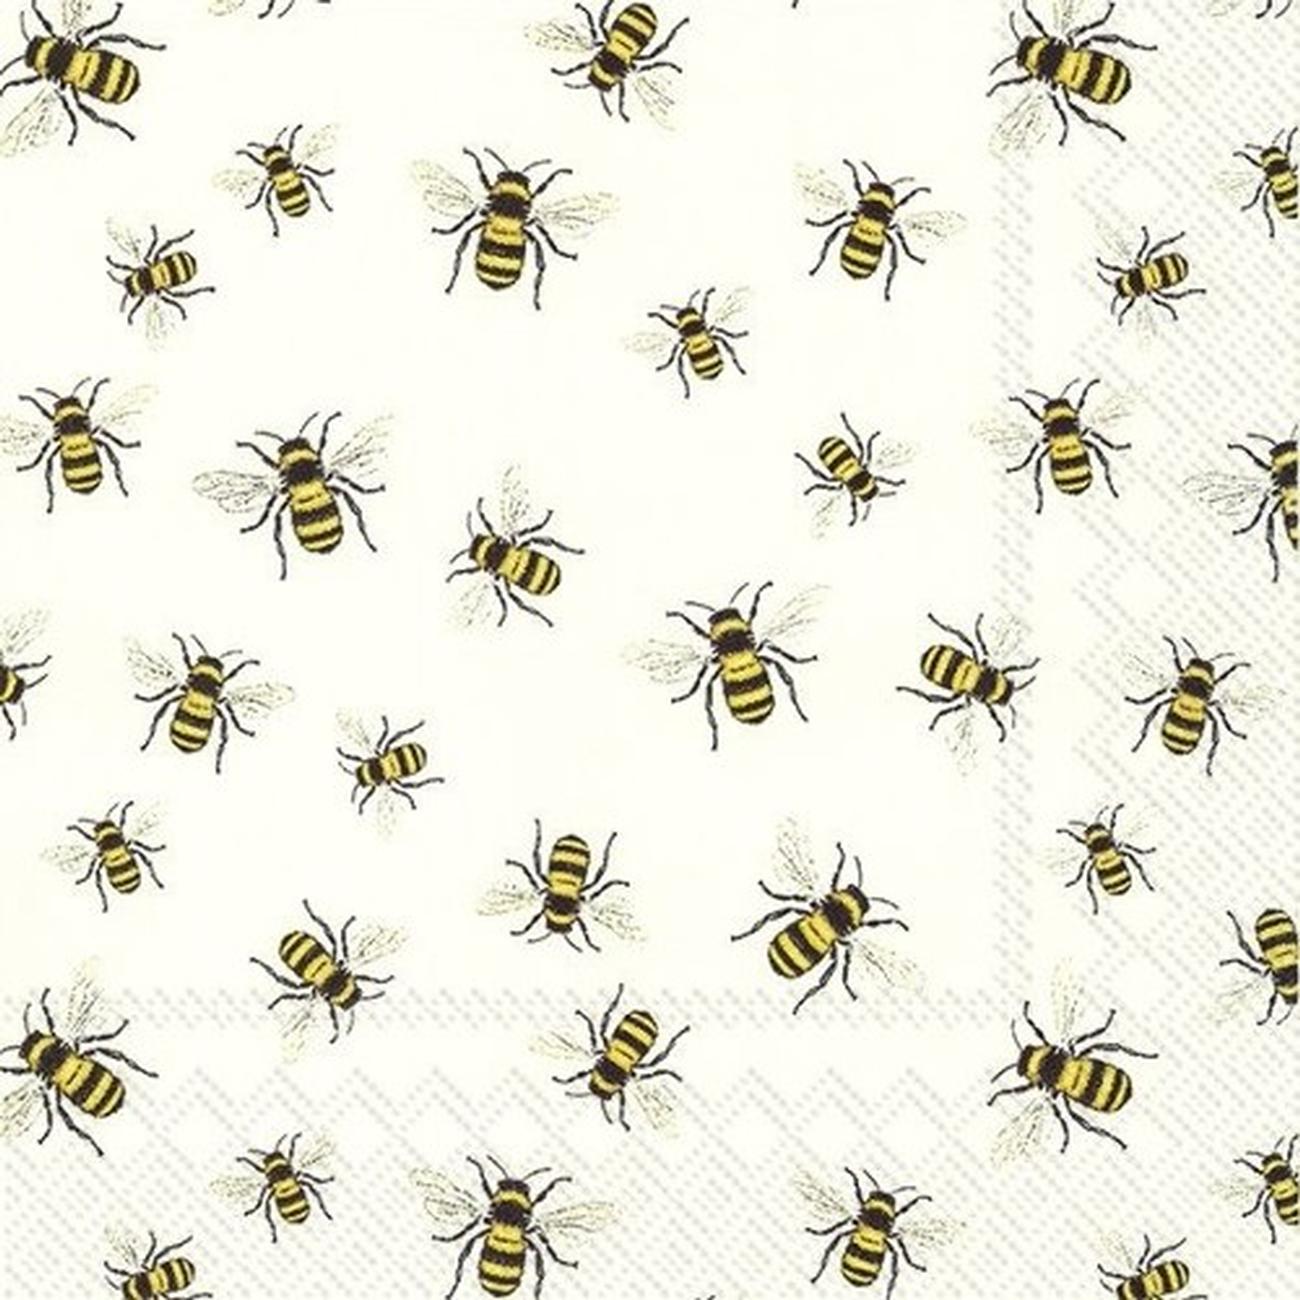 lovely-bees-white-lunch-napkins - IHR Lunch Napkins Lovely Bees White 